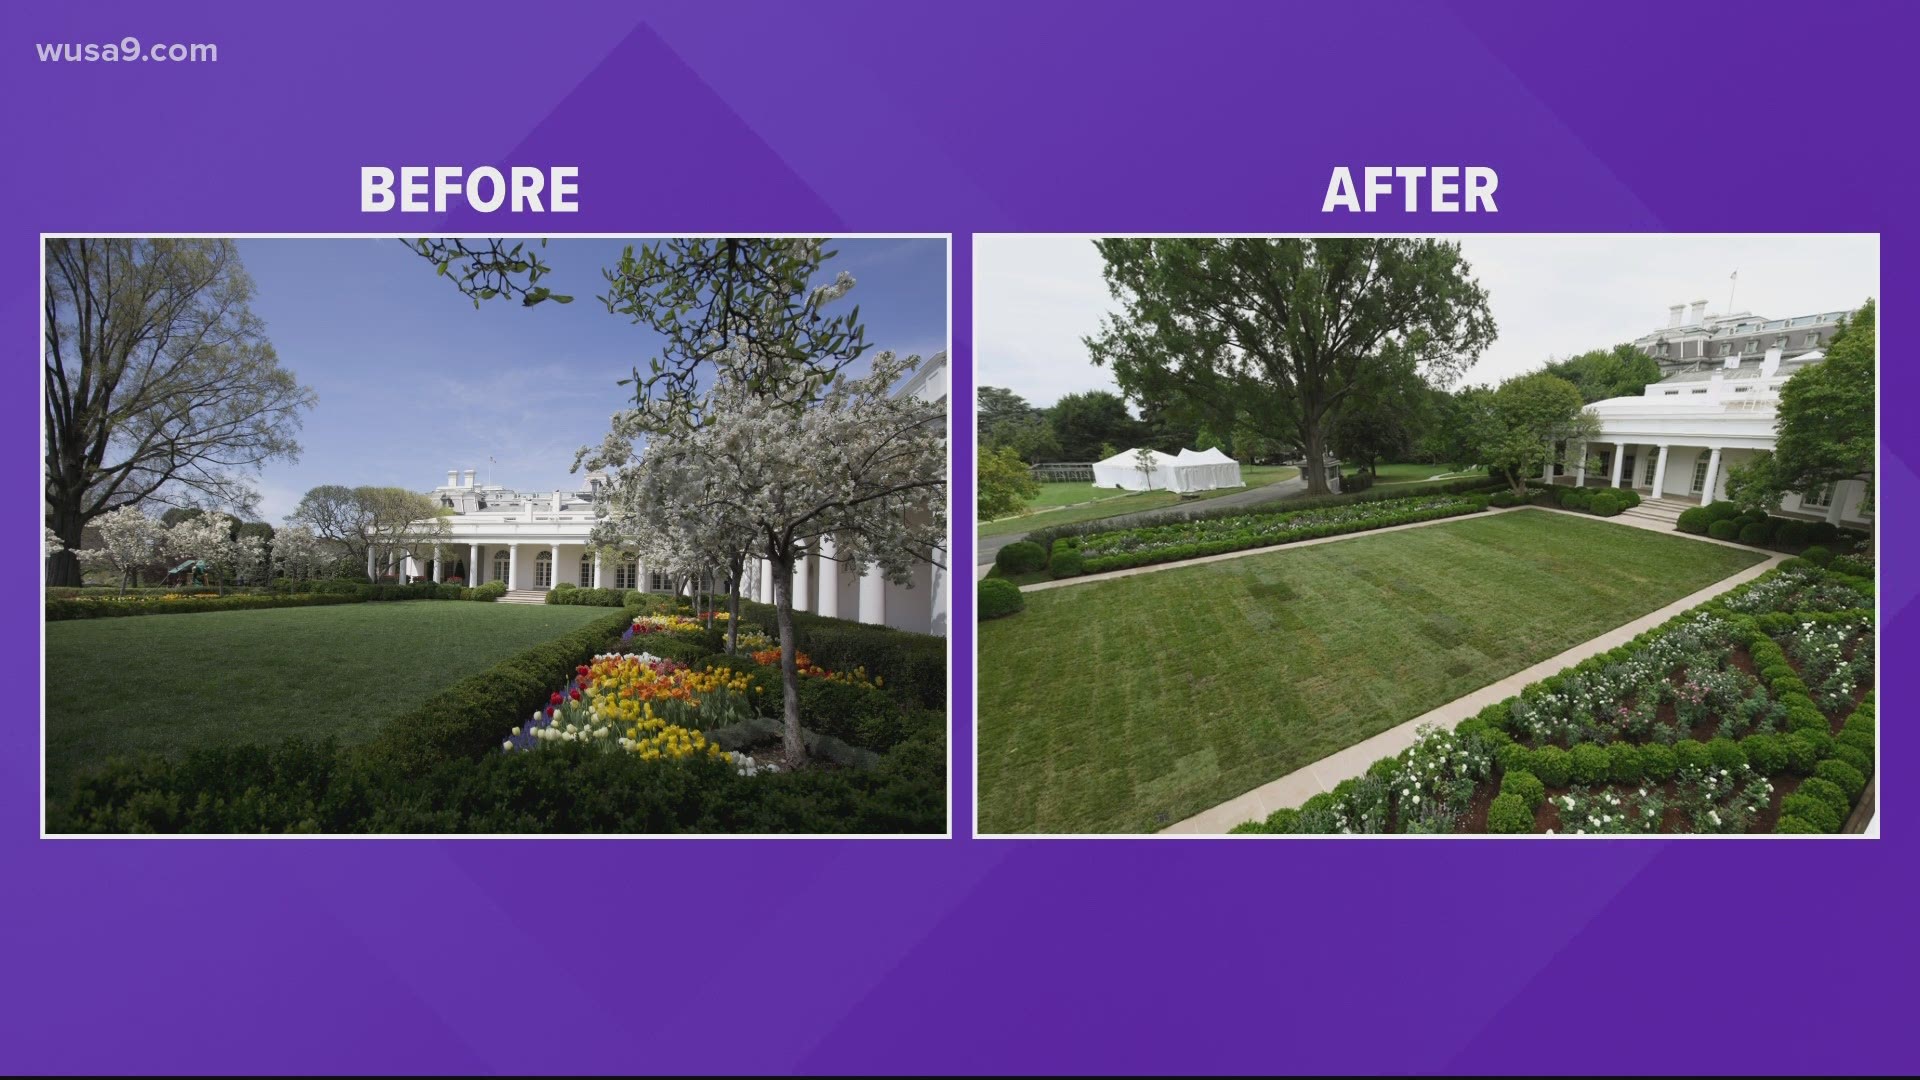 The petition asks Jill Biden and Doug Emhoff to "take this on" and restore the garden to Jackie Kennedy's original design.